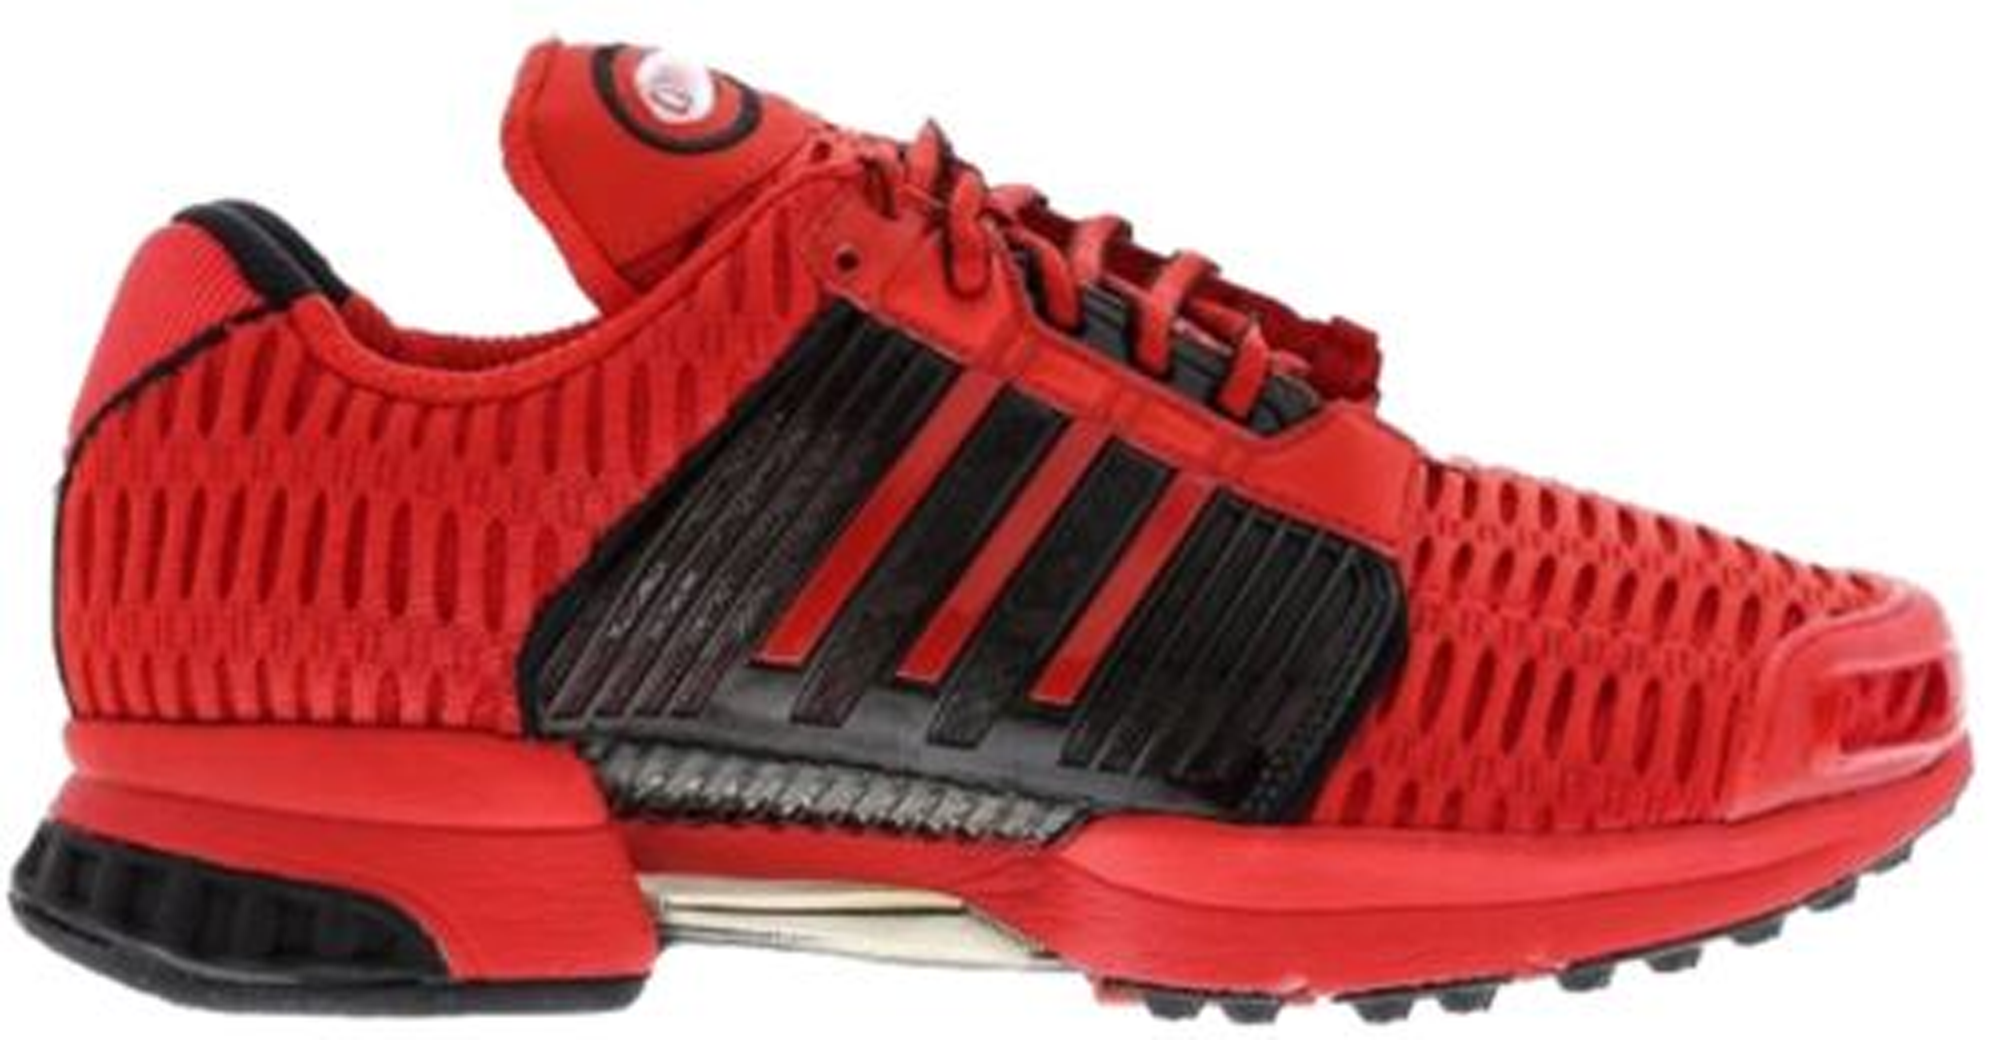 climacool red